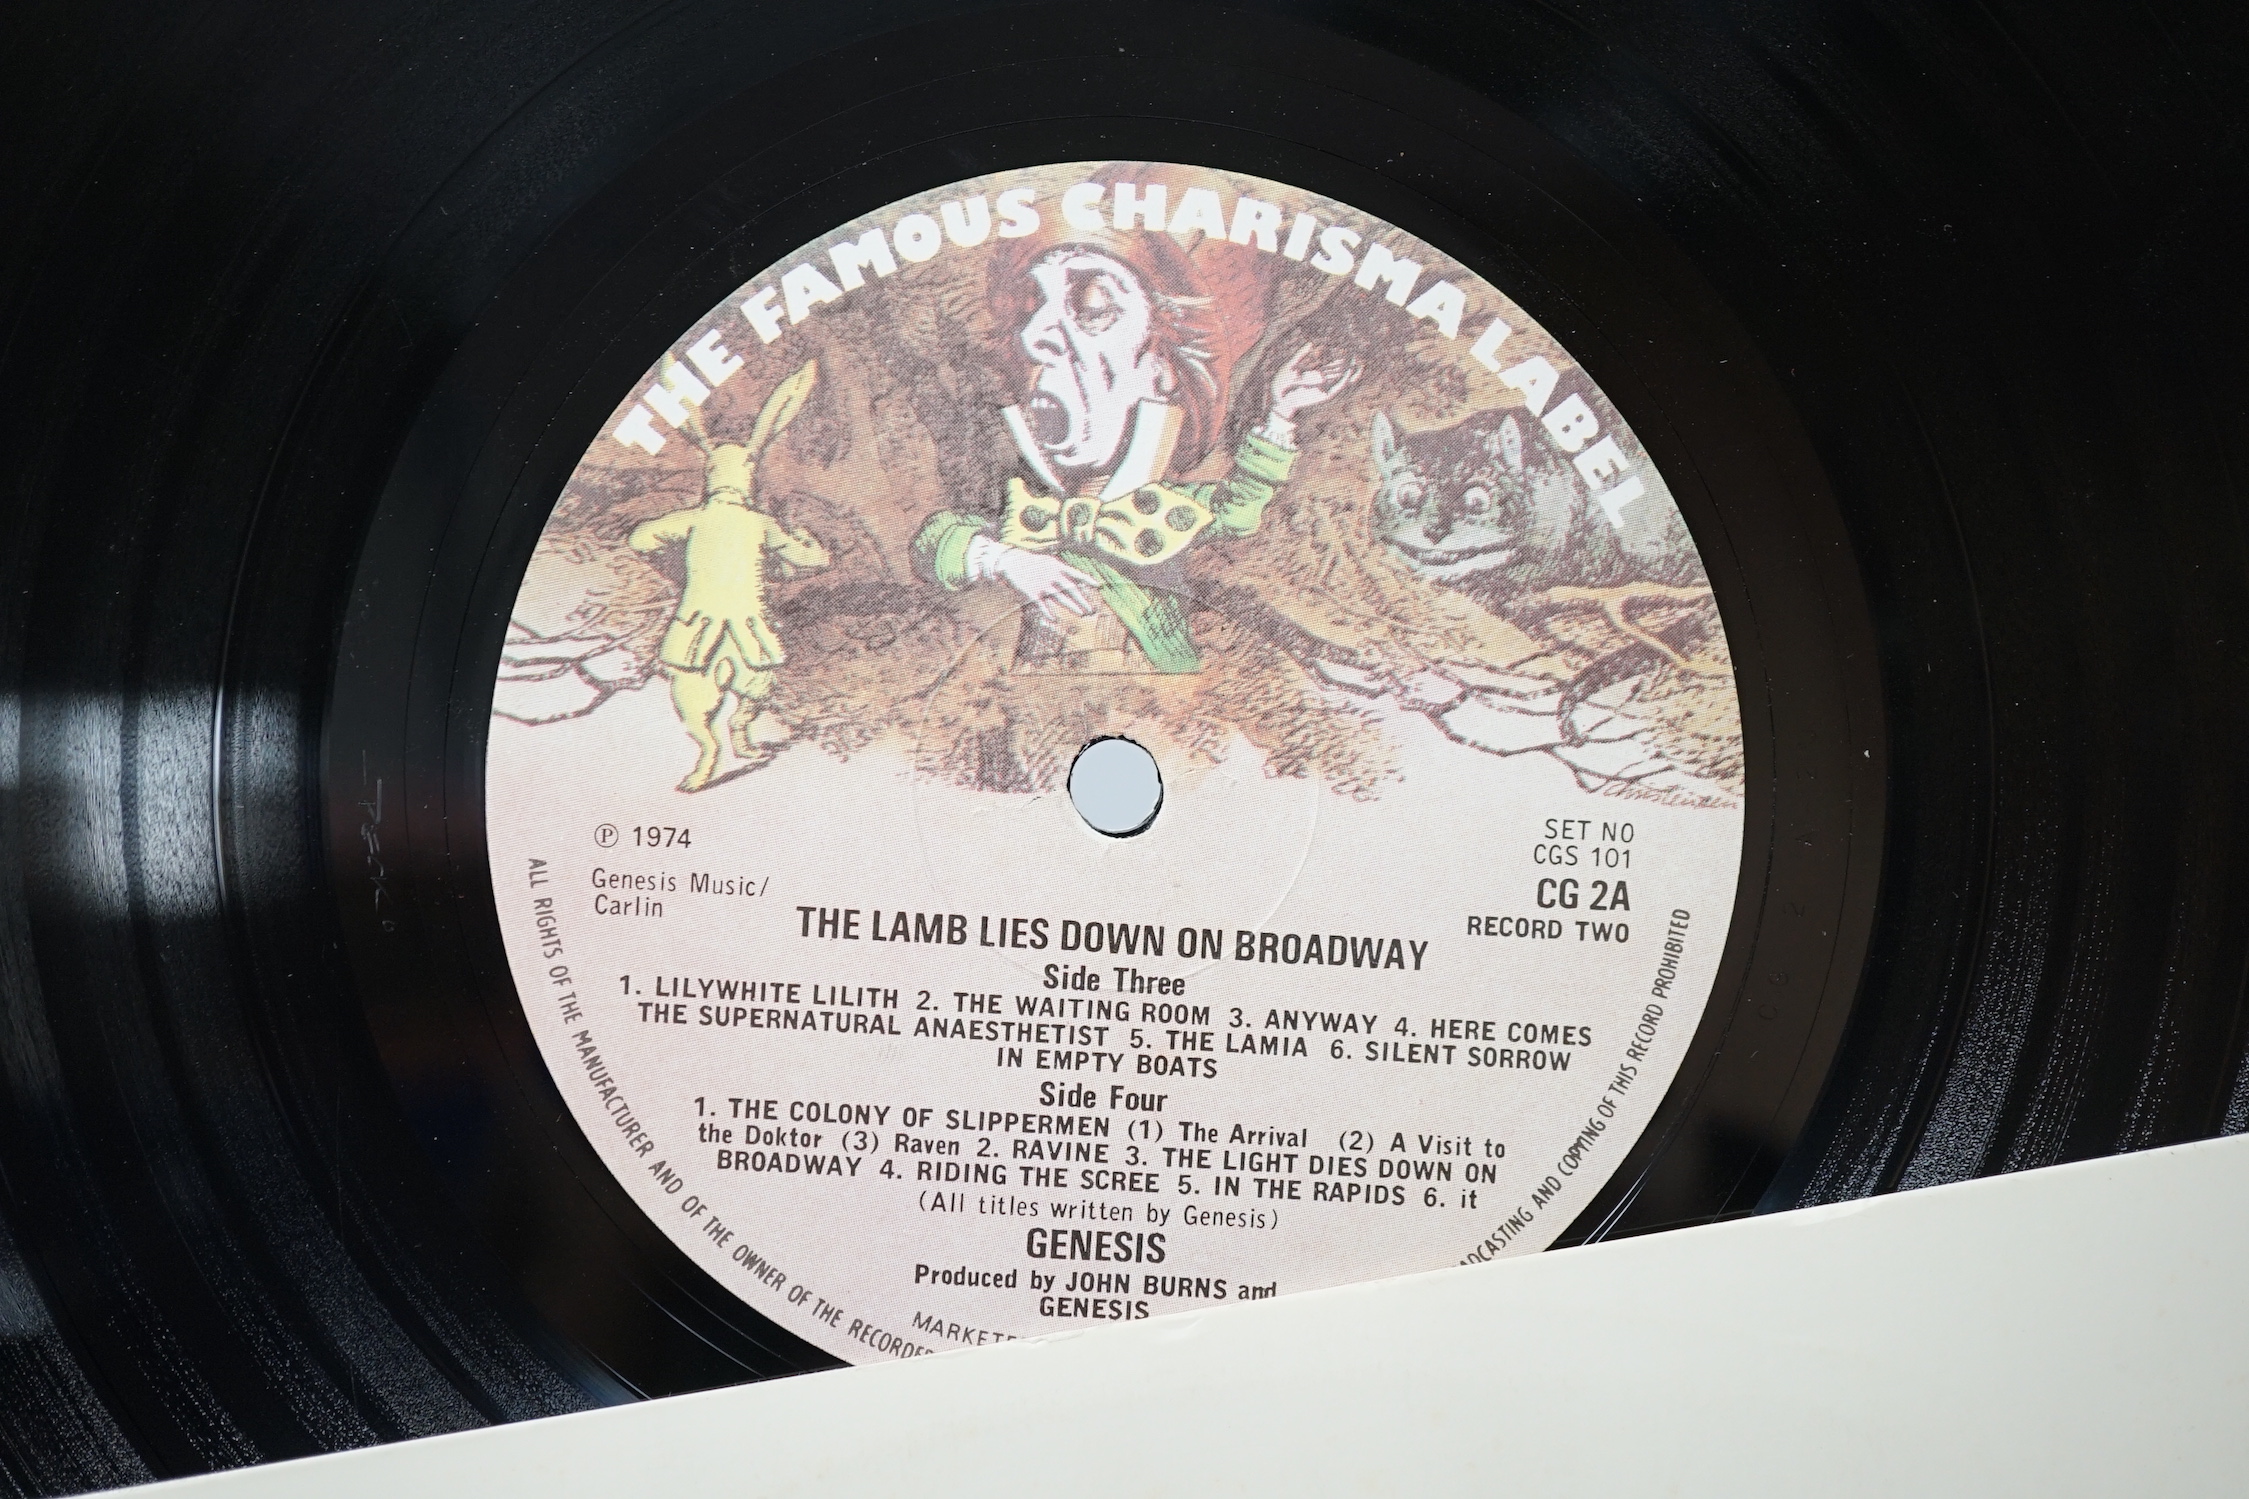 Two Genesis LP record albums; Nursery Cryme (CAS.1052) And the lamb lies down on Broadway (CG1A), - Image 5 of 6